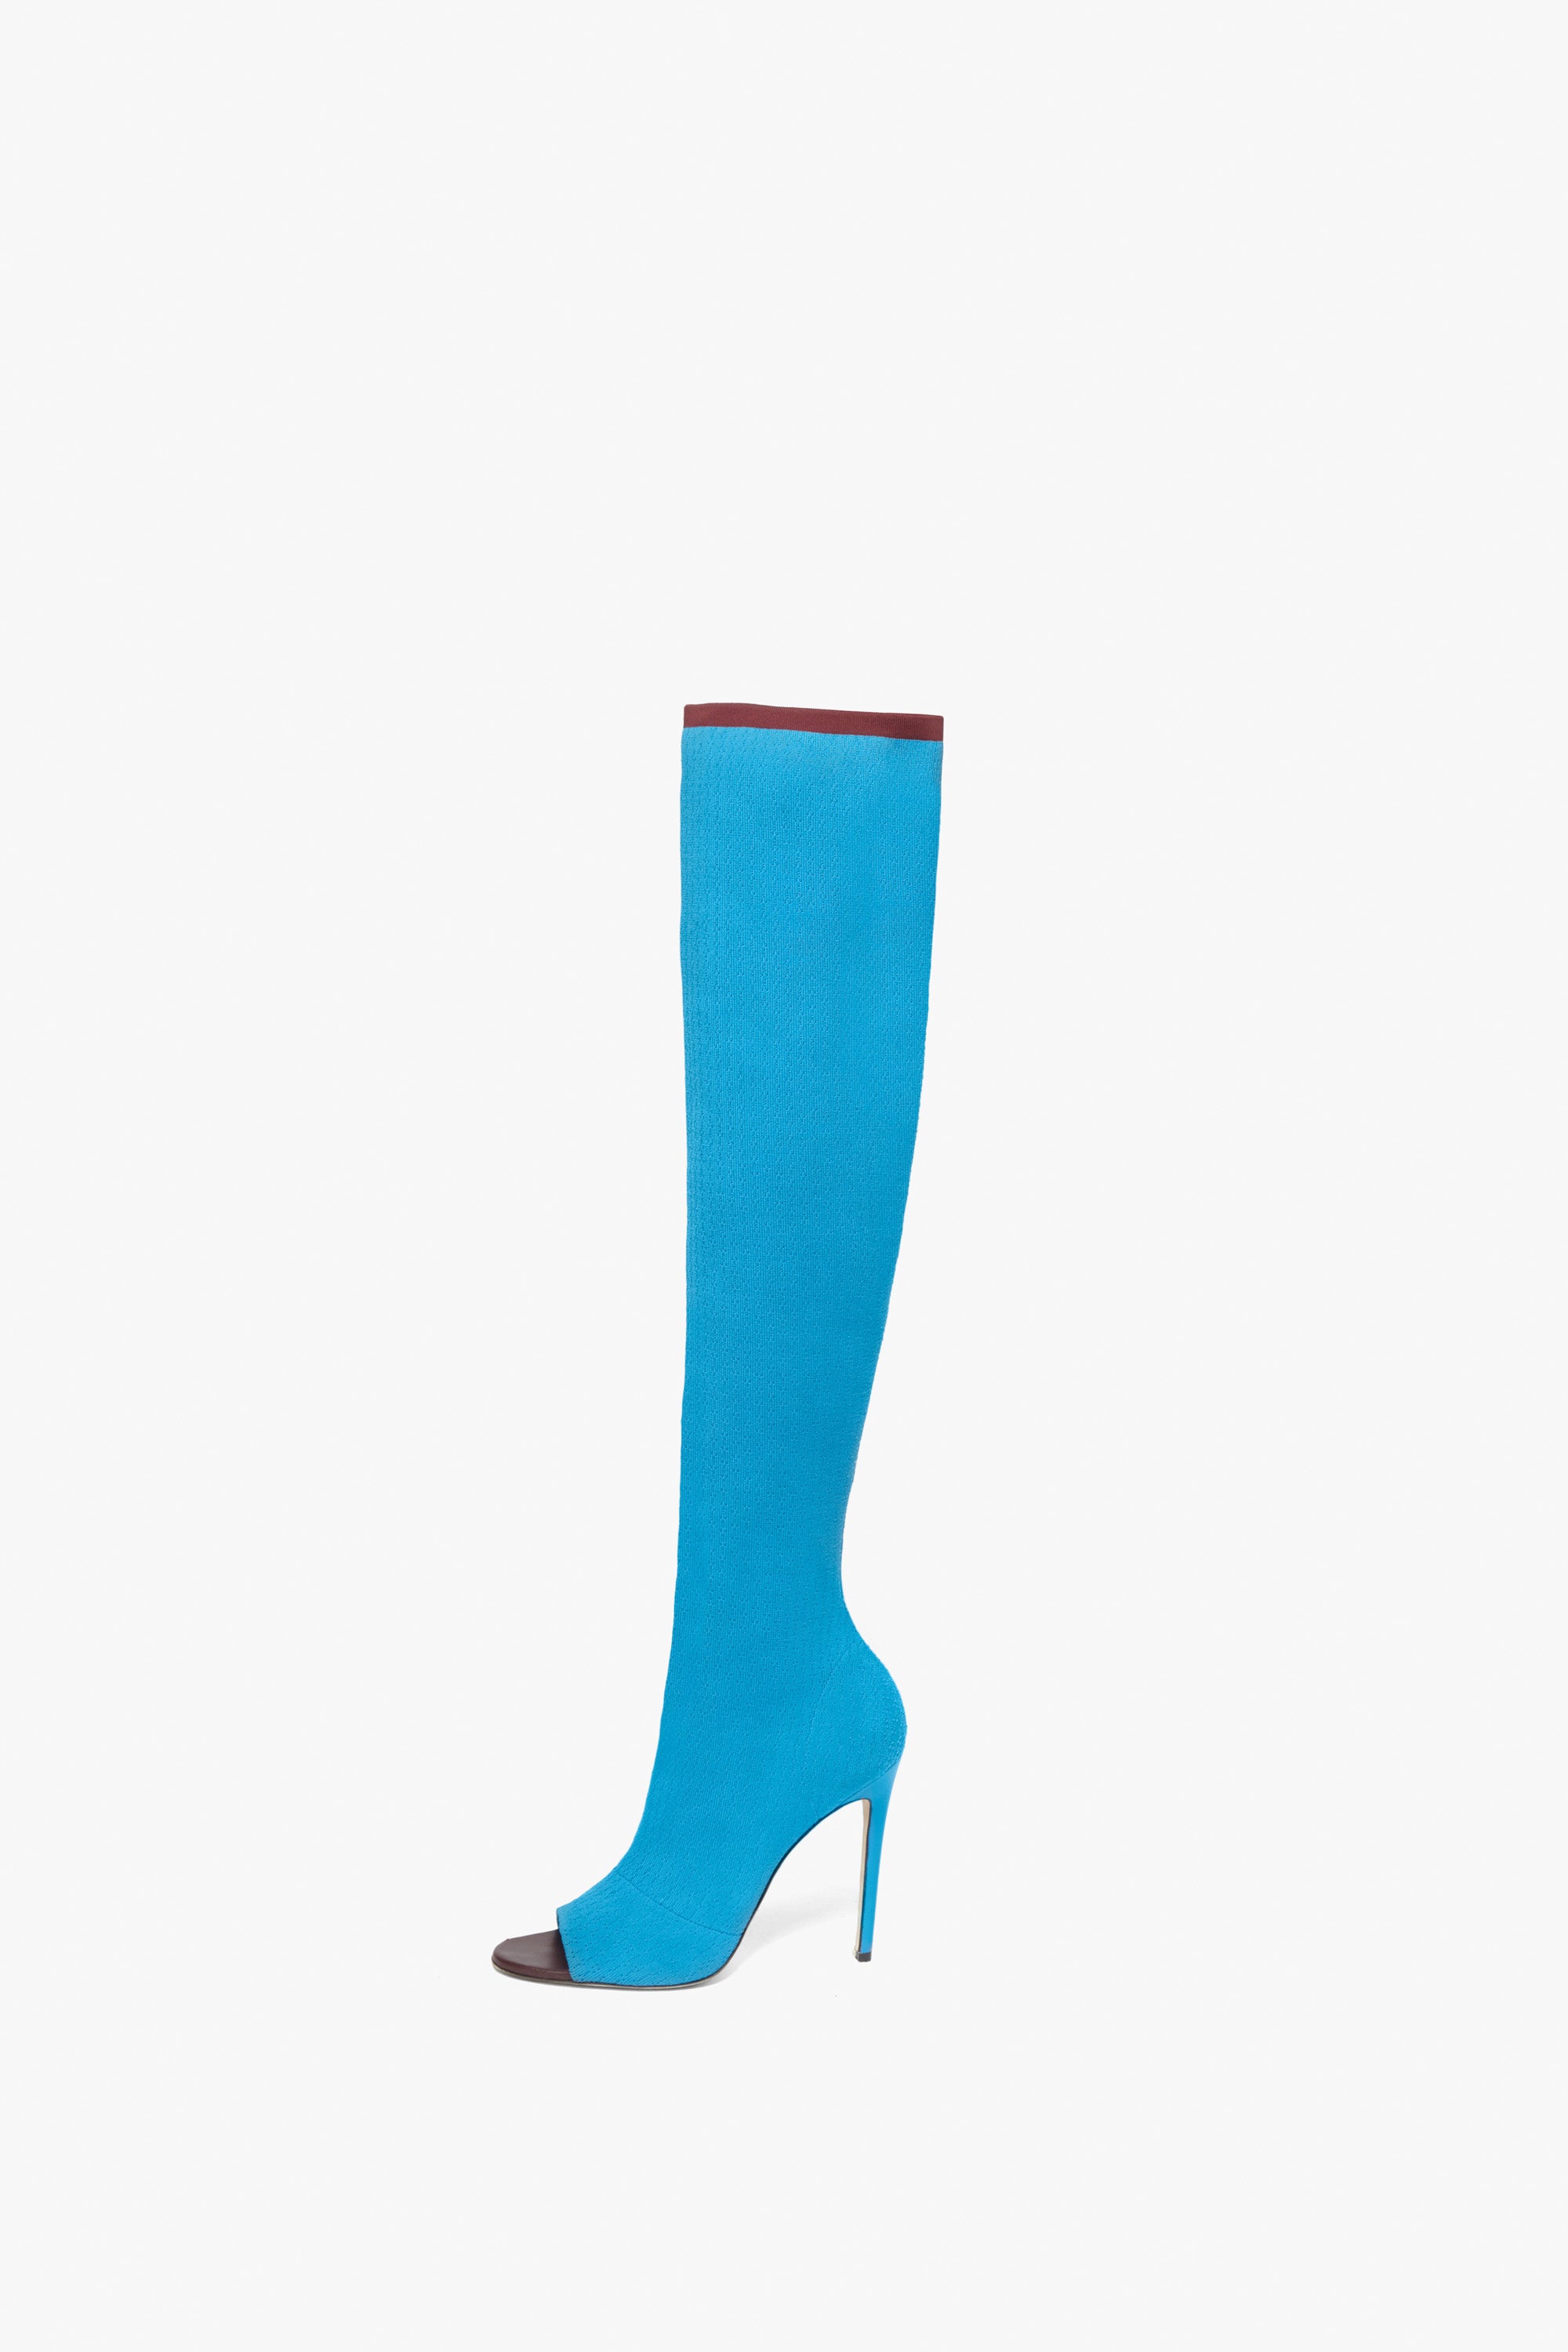 turquoise knee high boots